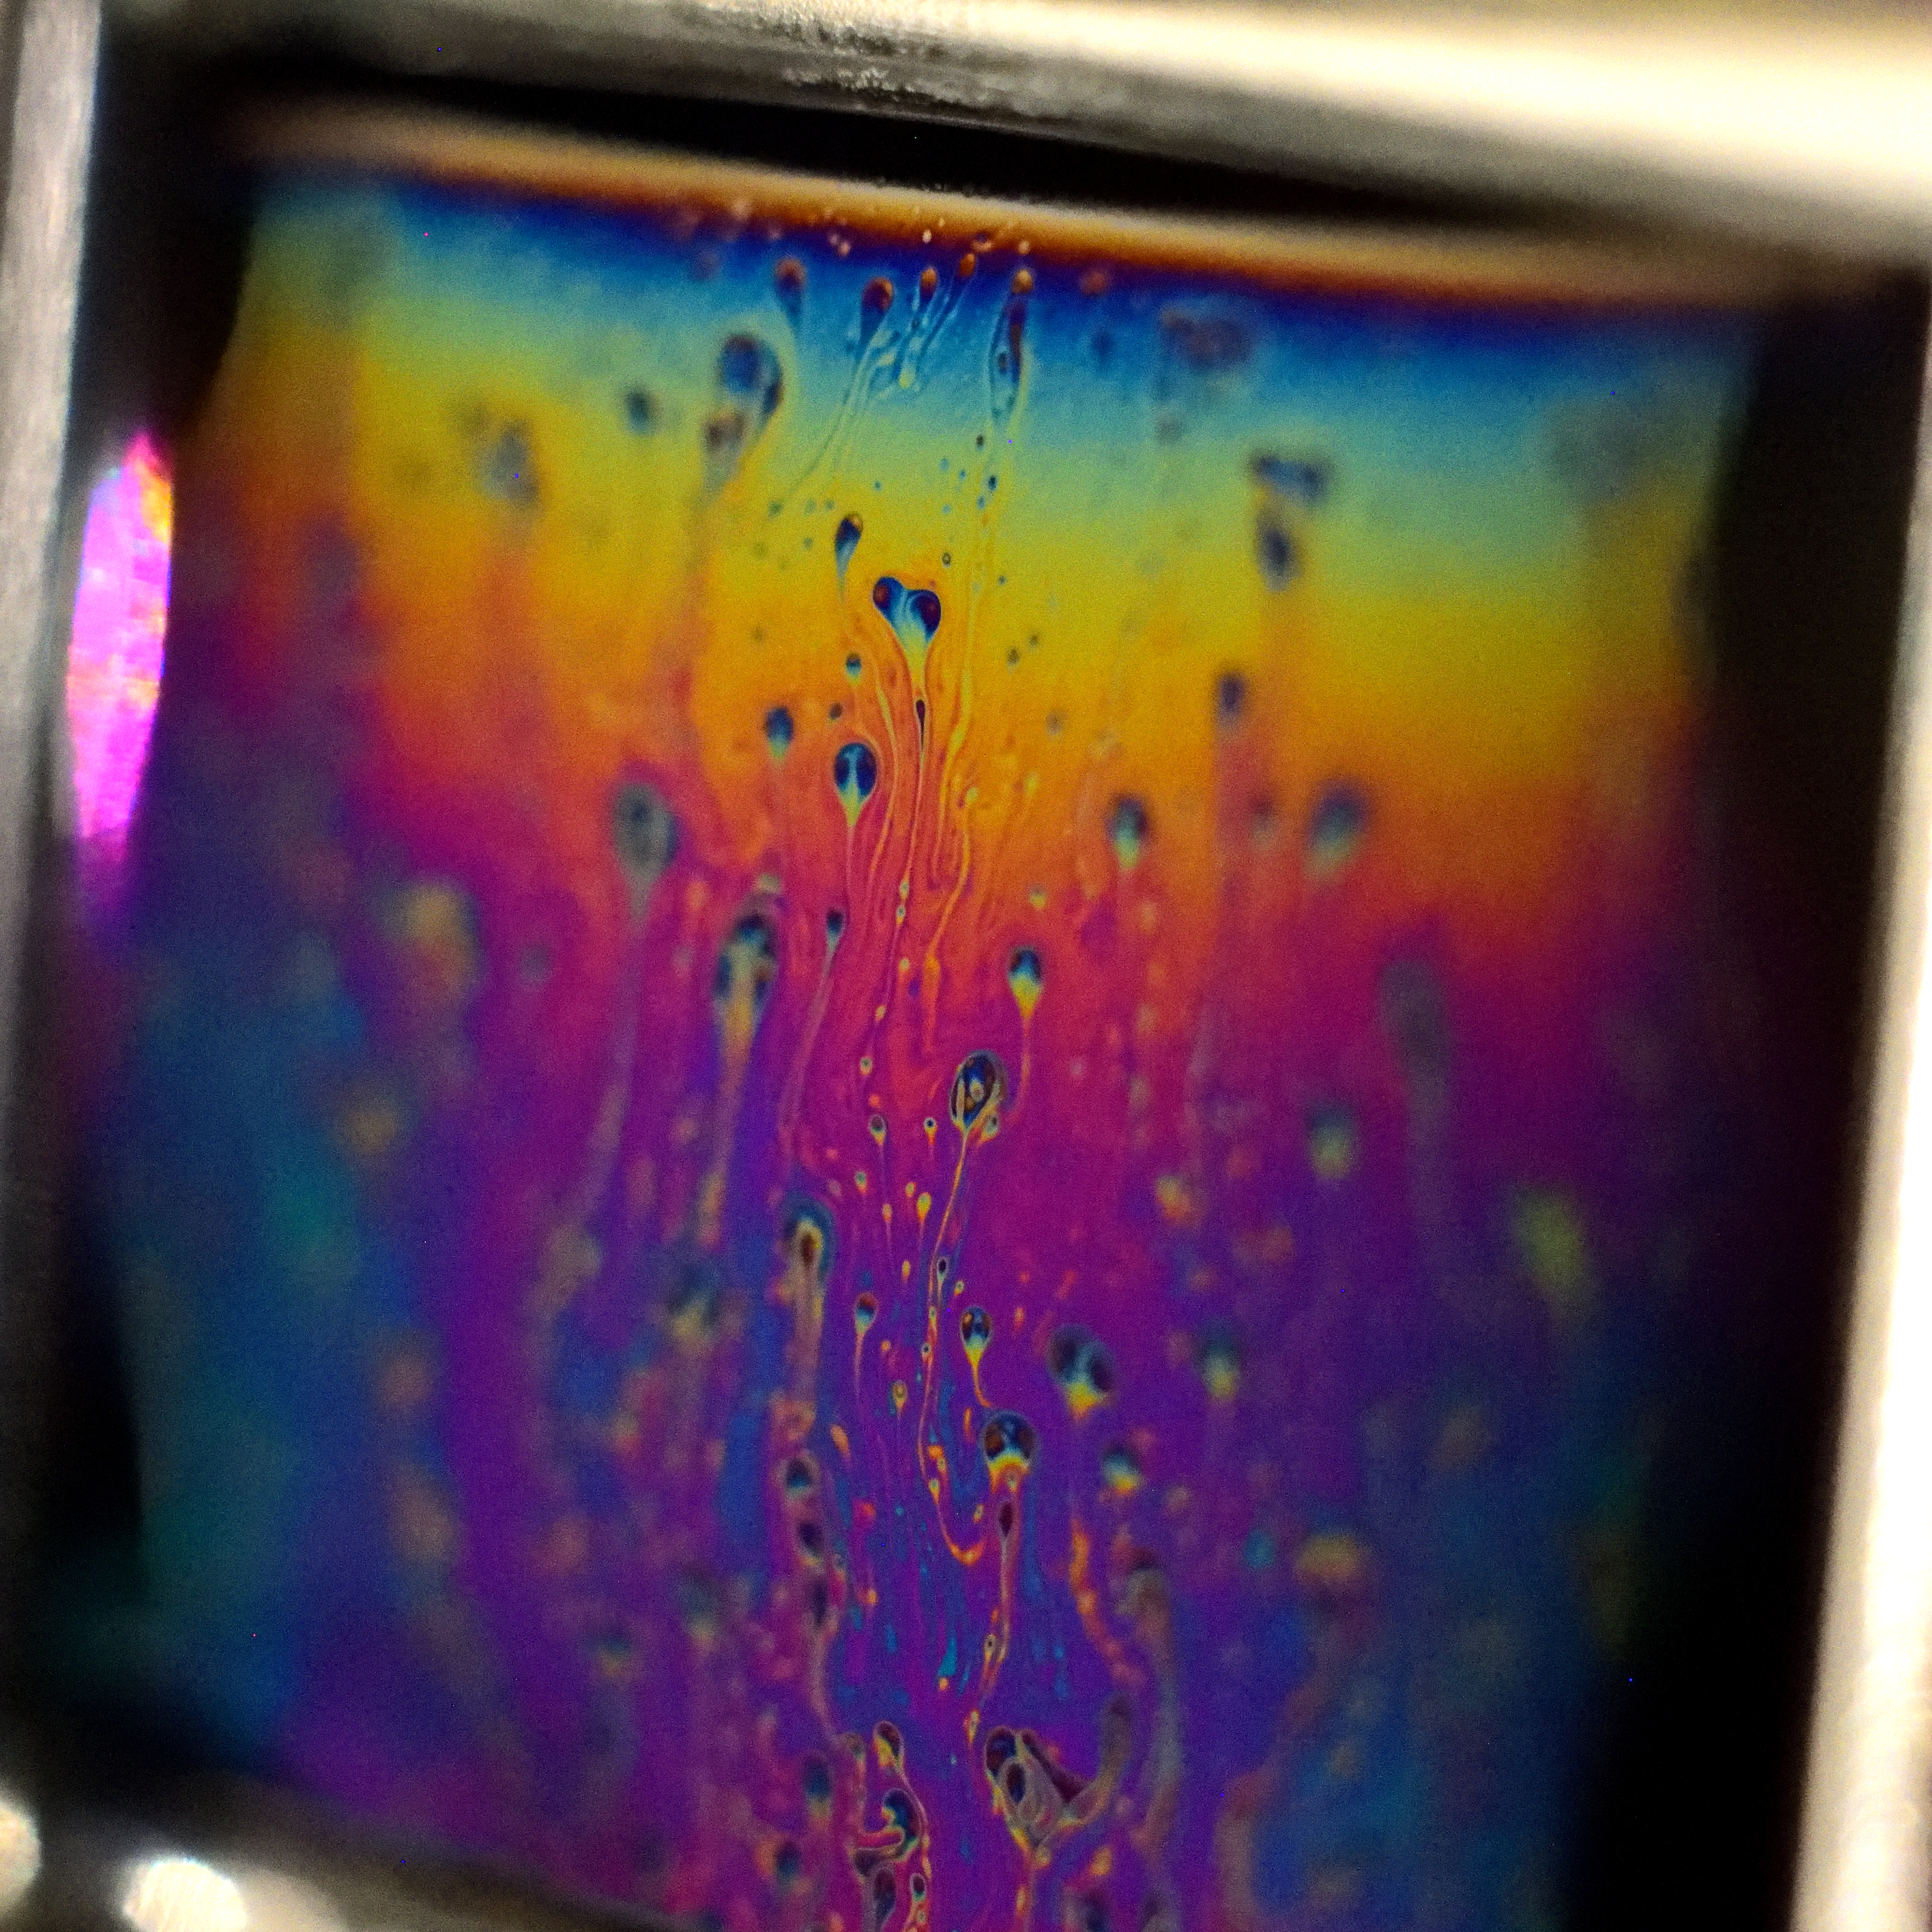 Turbulent flow within the draining of a thin soap film. Colours arise from interference within the thin film indicating differences in thickness.
